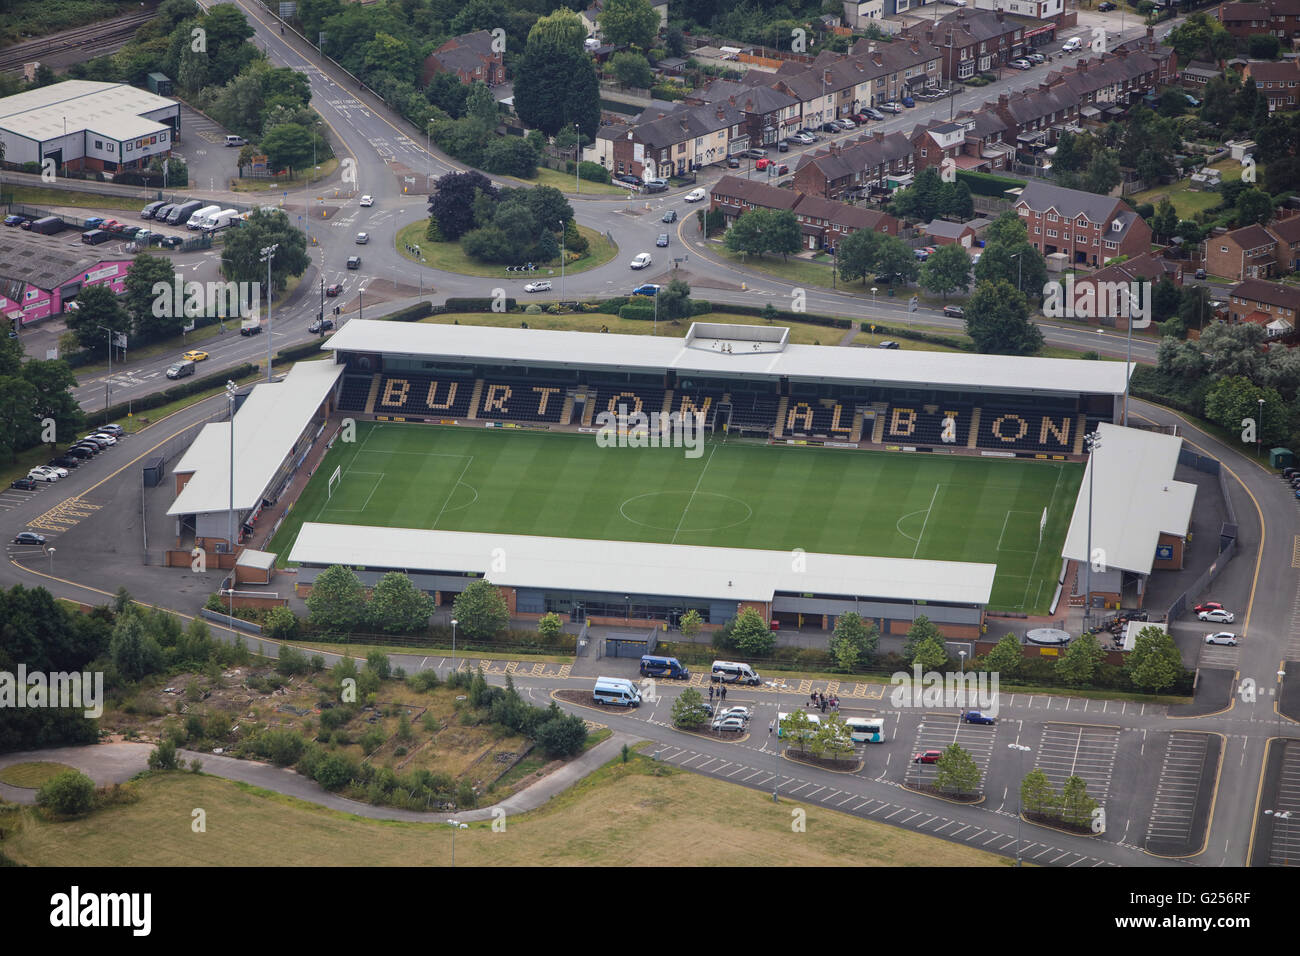 Burton Albion High Resolution Stock Photography and Images - Alamy